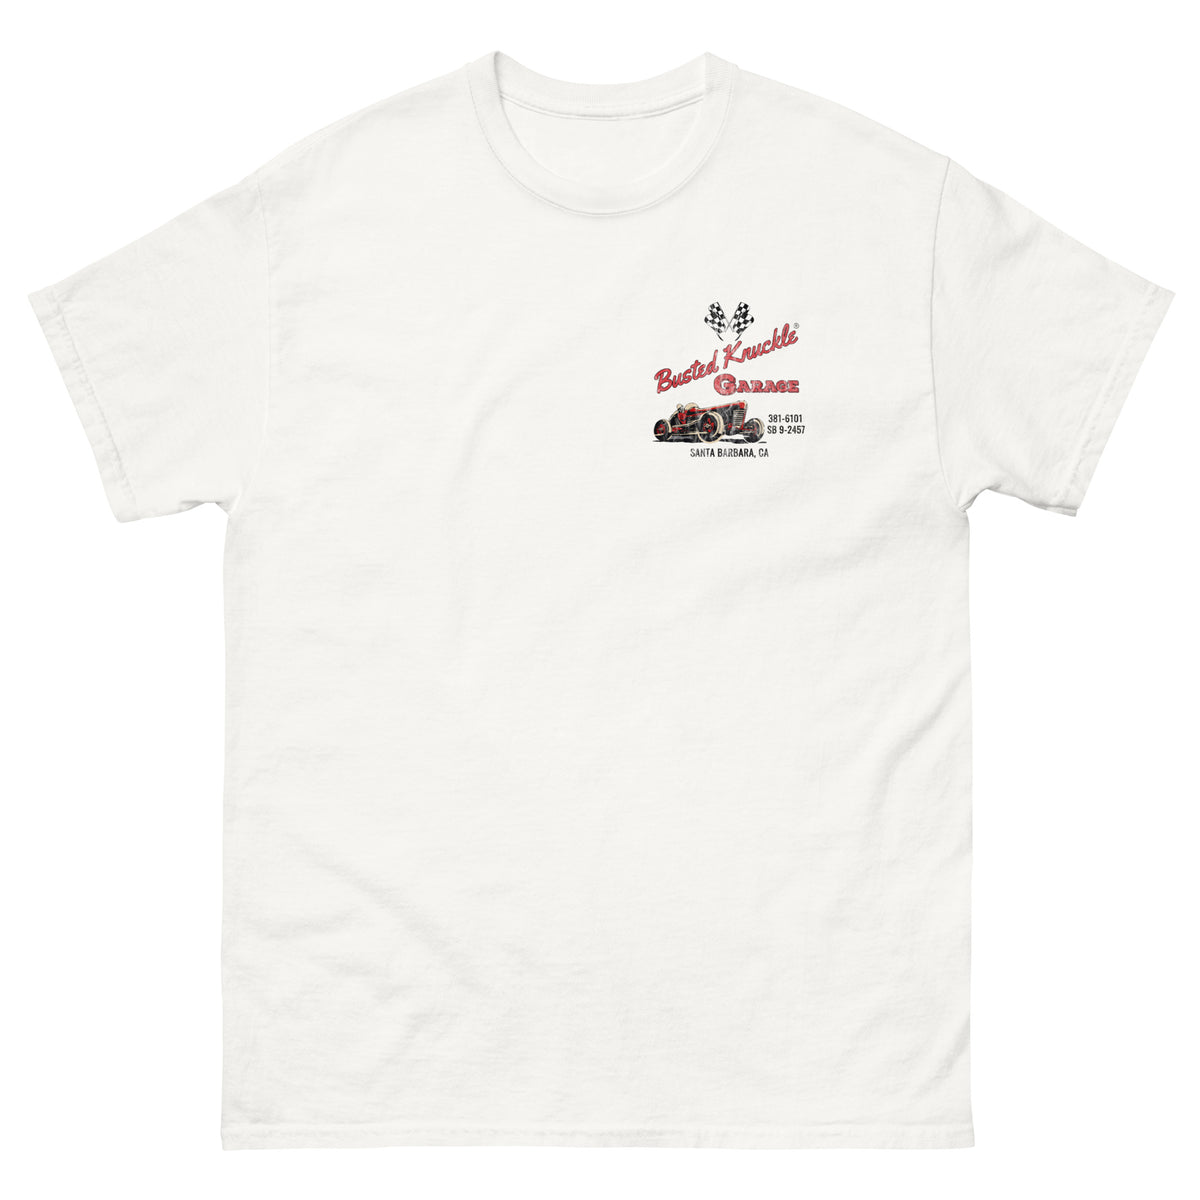 Busted Knuckle Garage California Speed Shop 2-Sided T-Shirt